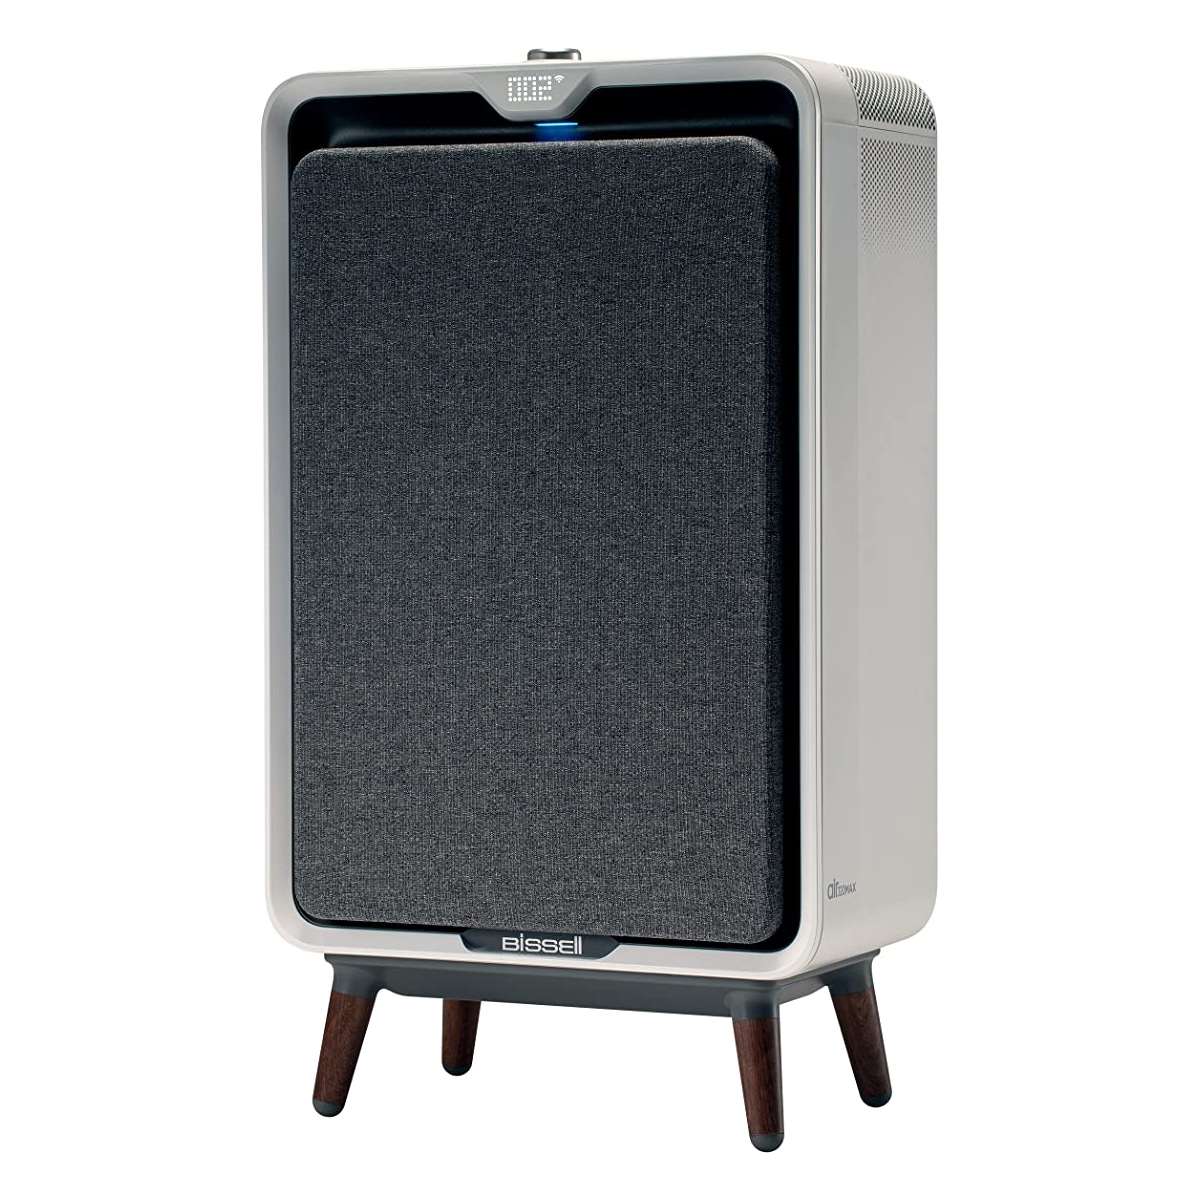 BISSELL air320 Max Wifi Connected Smart Air Purifier with HEPA